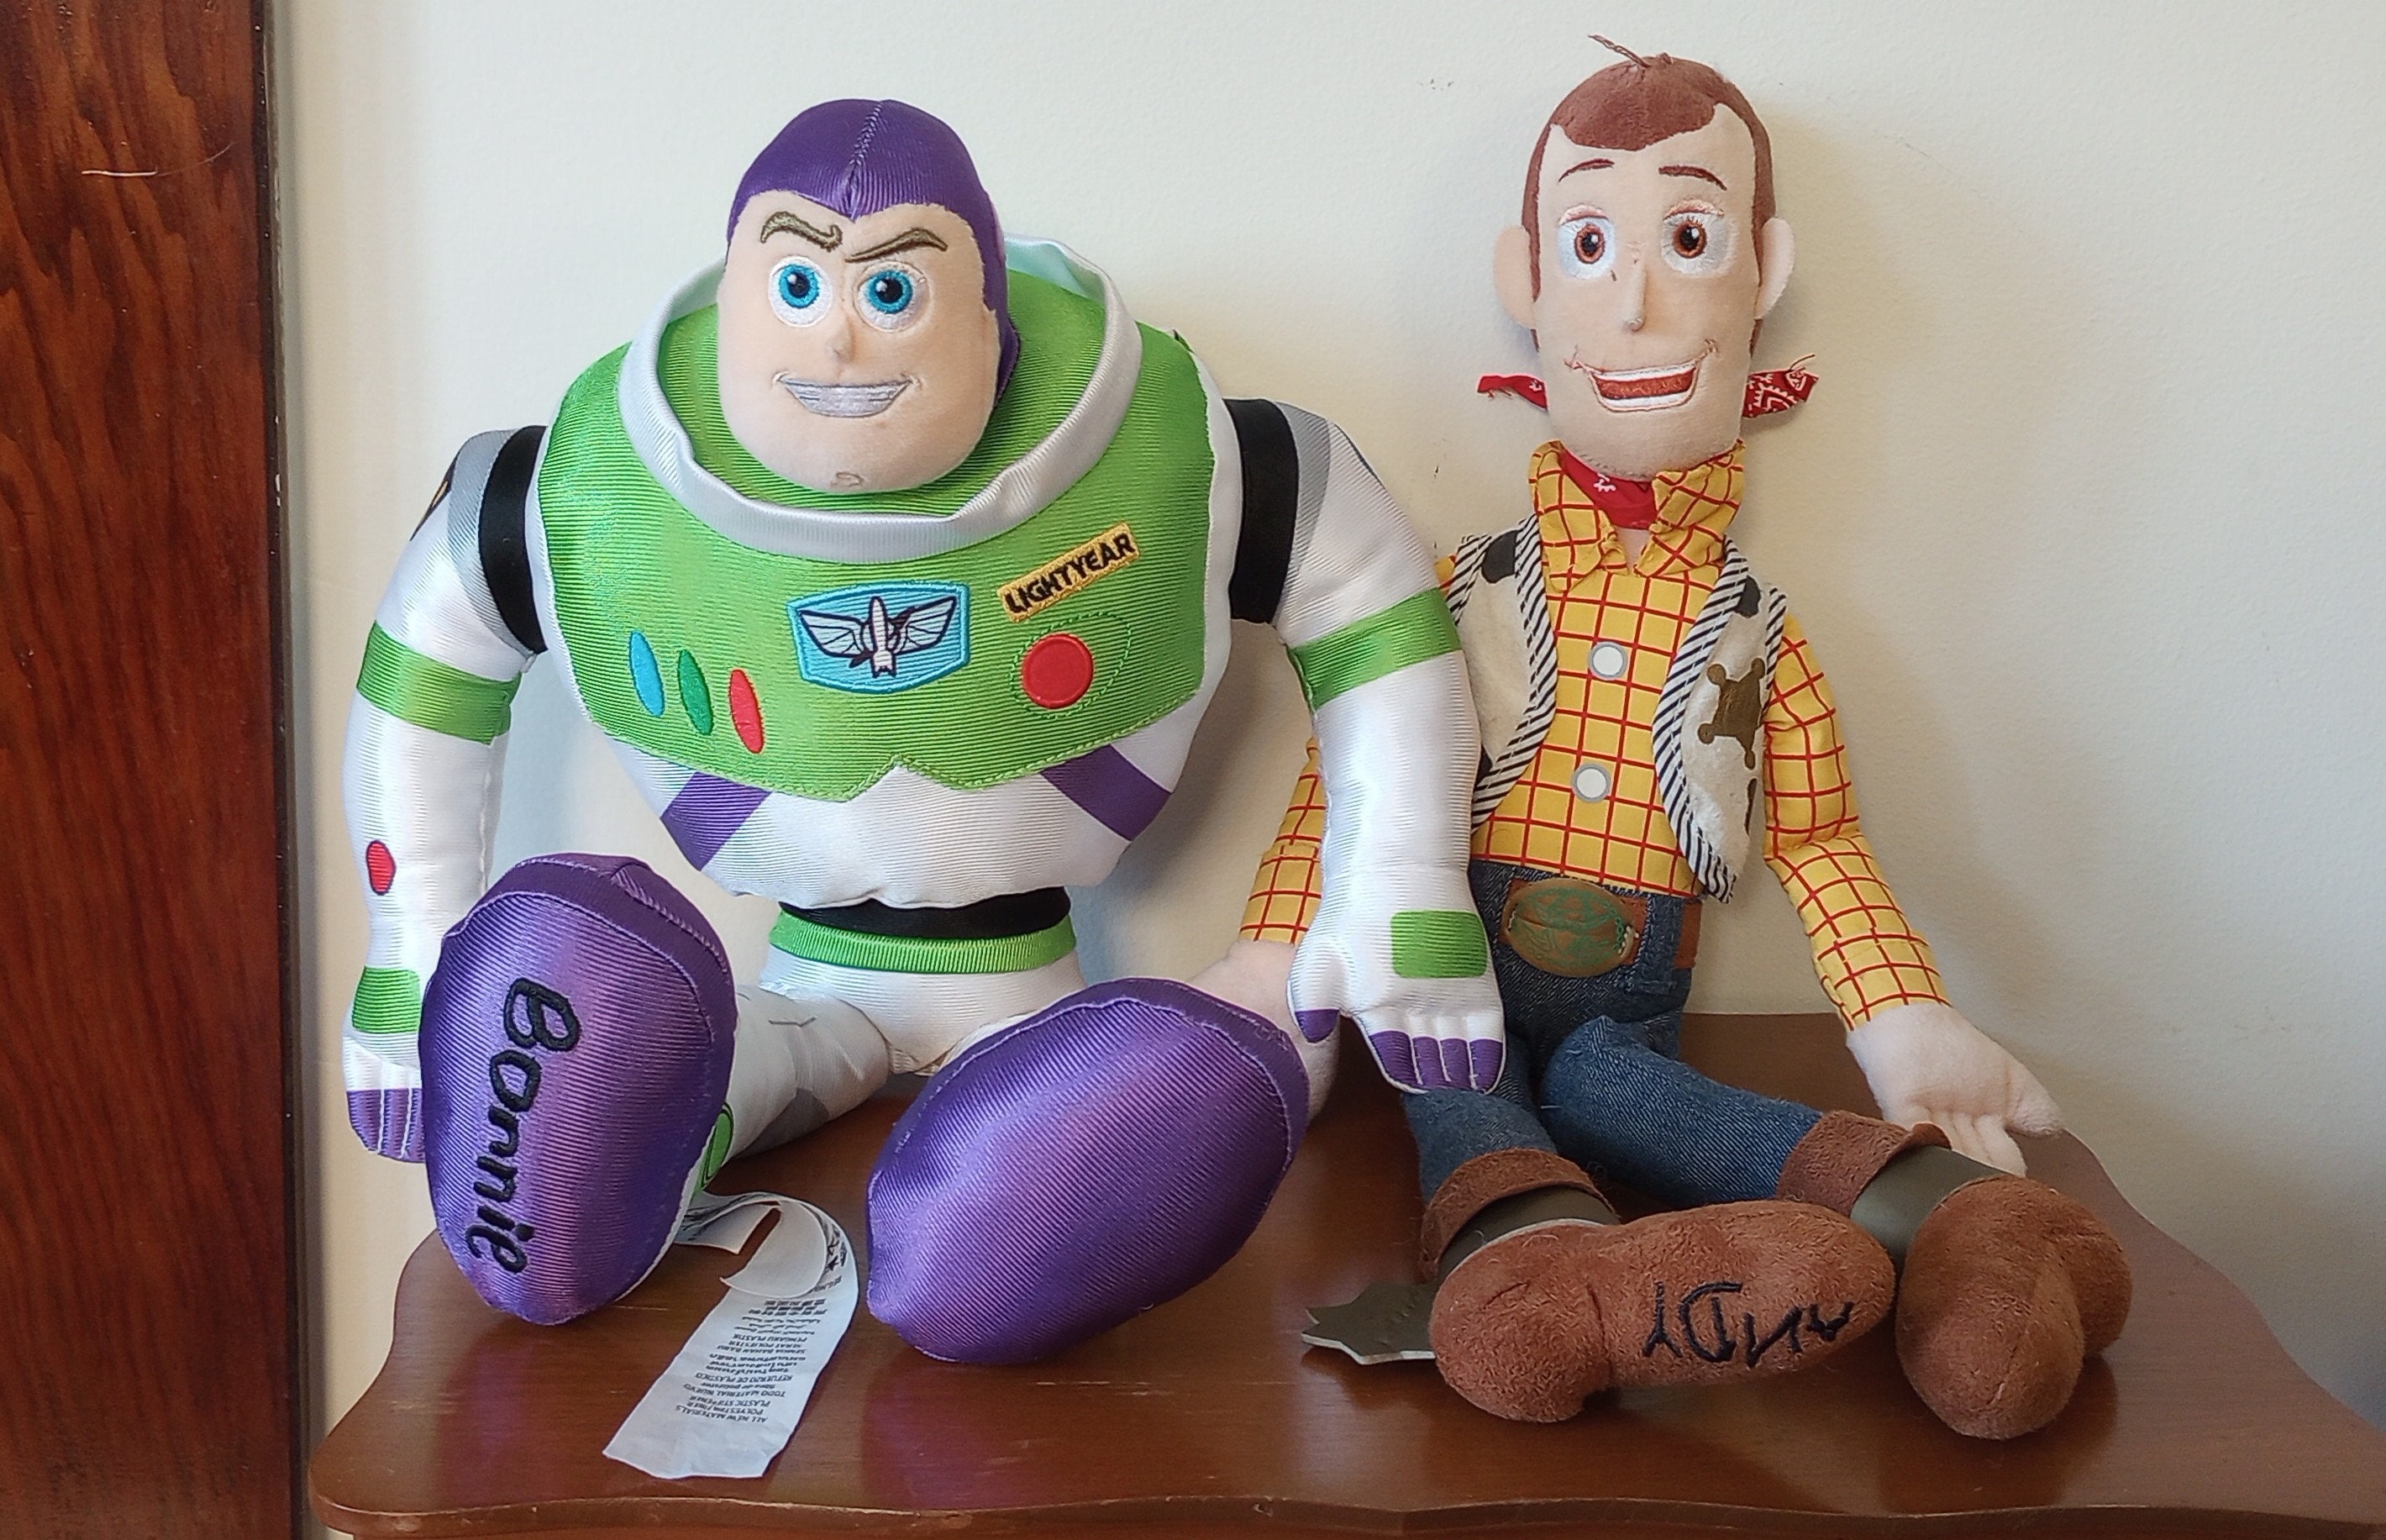 Bonnie Anderson (Toy Story) by ferocity